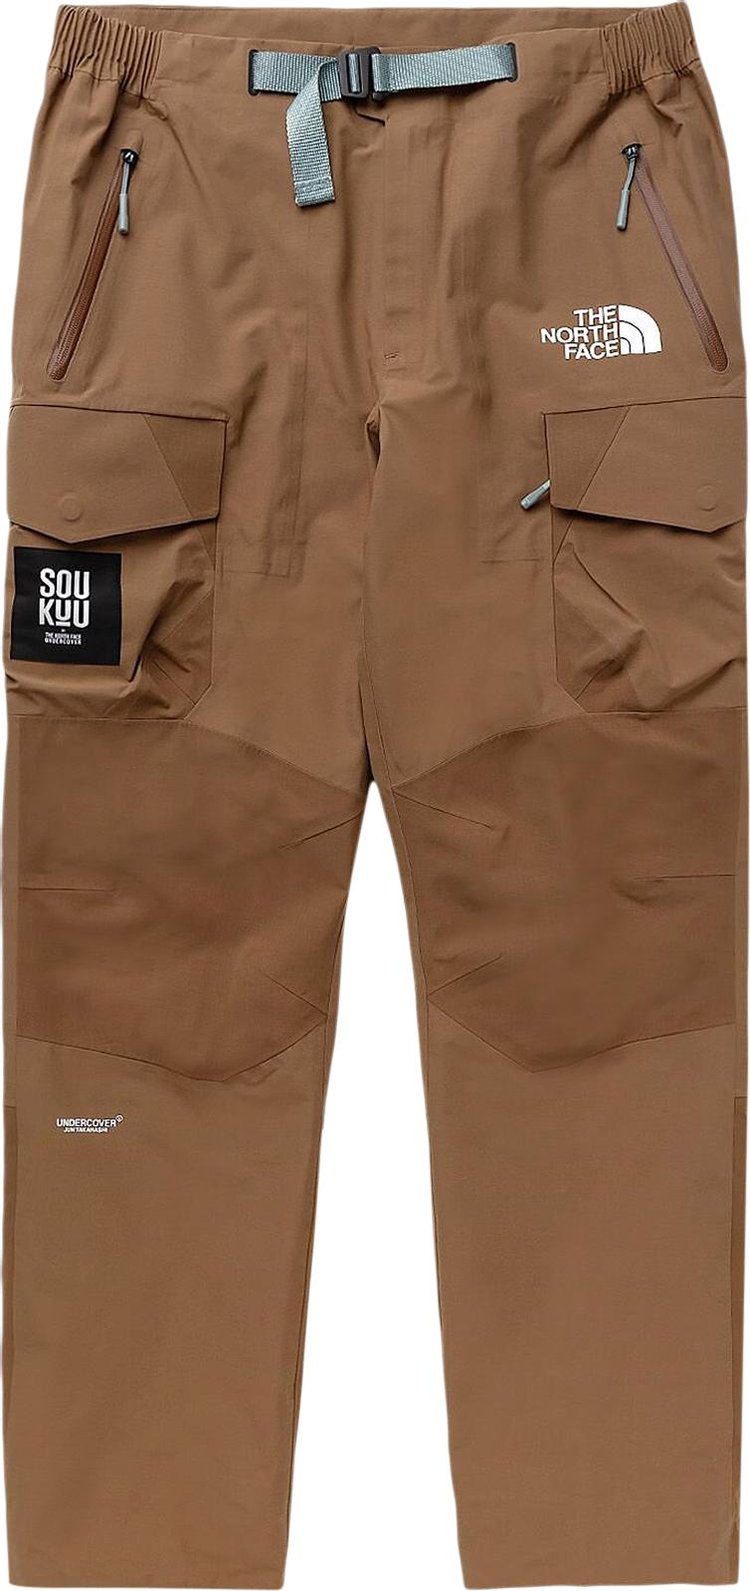 The North Face x Undercover SOUKUU Geodesc Shell Pants 'Sepia'